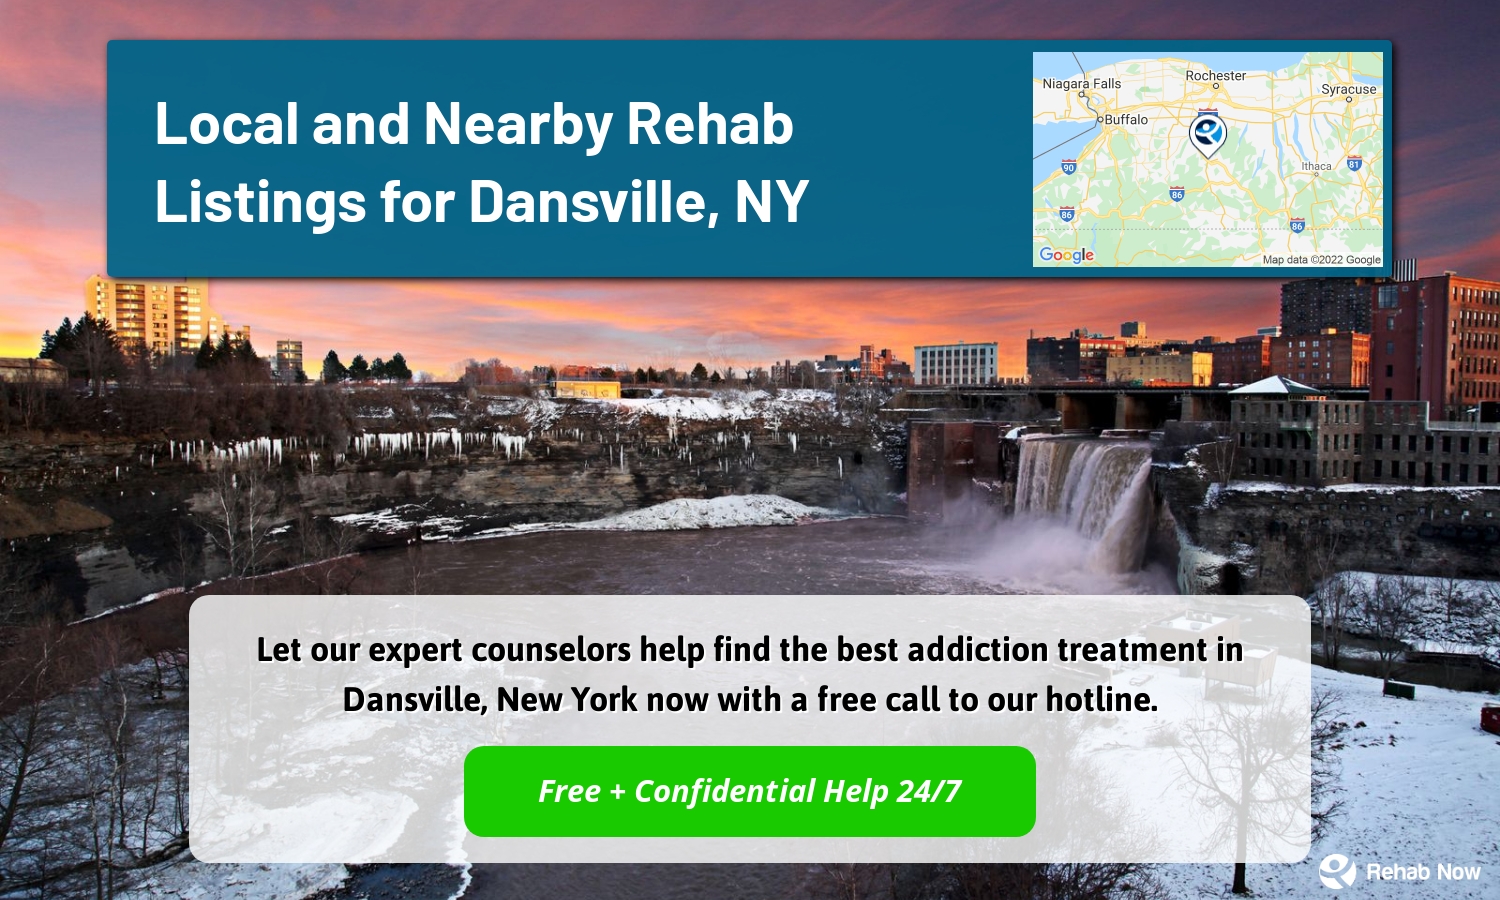 Let our expert counselors help find the best addiction treatment in Dansville, New York now with a free call to our hotline.